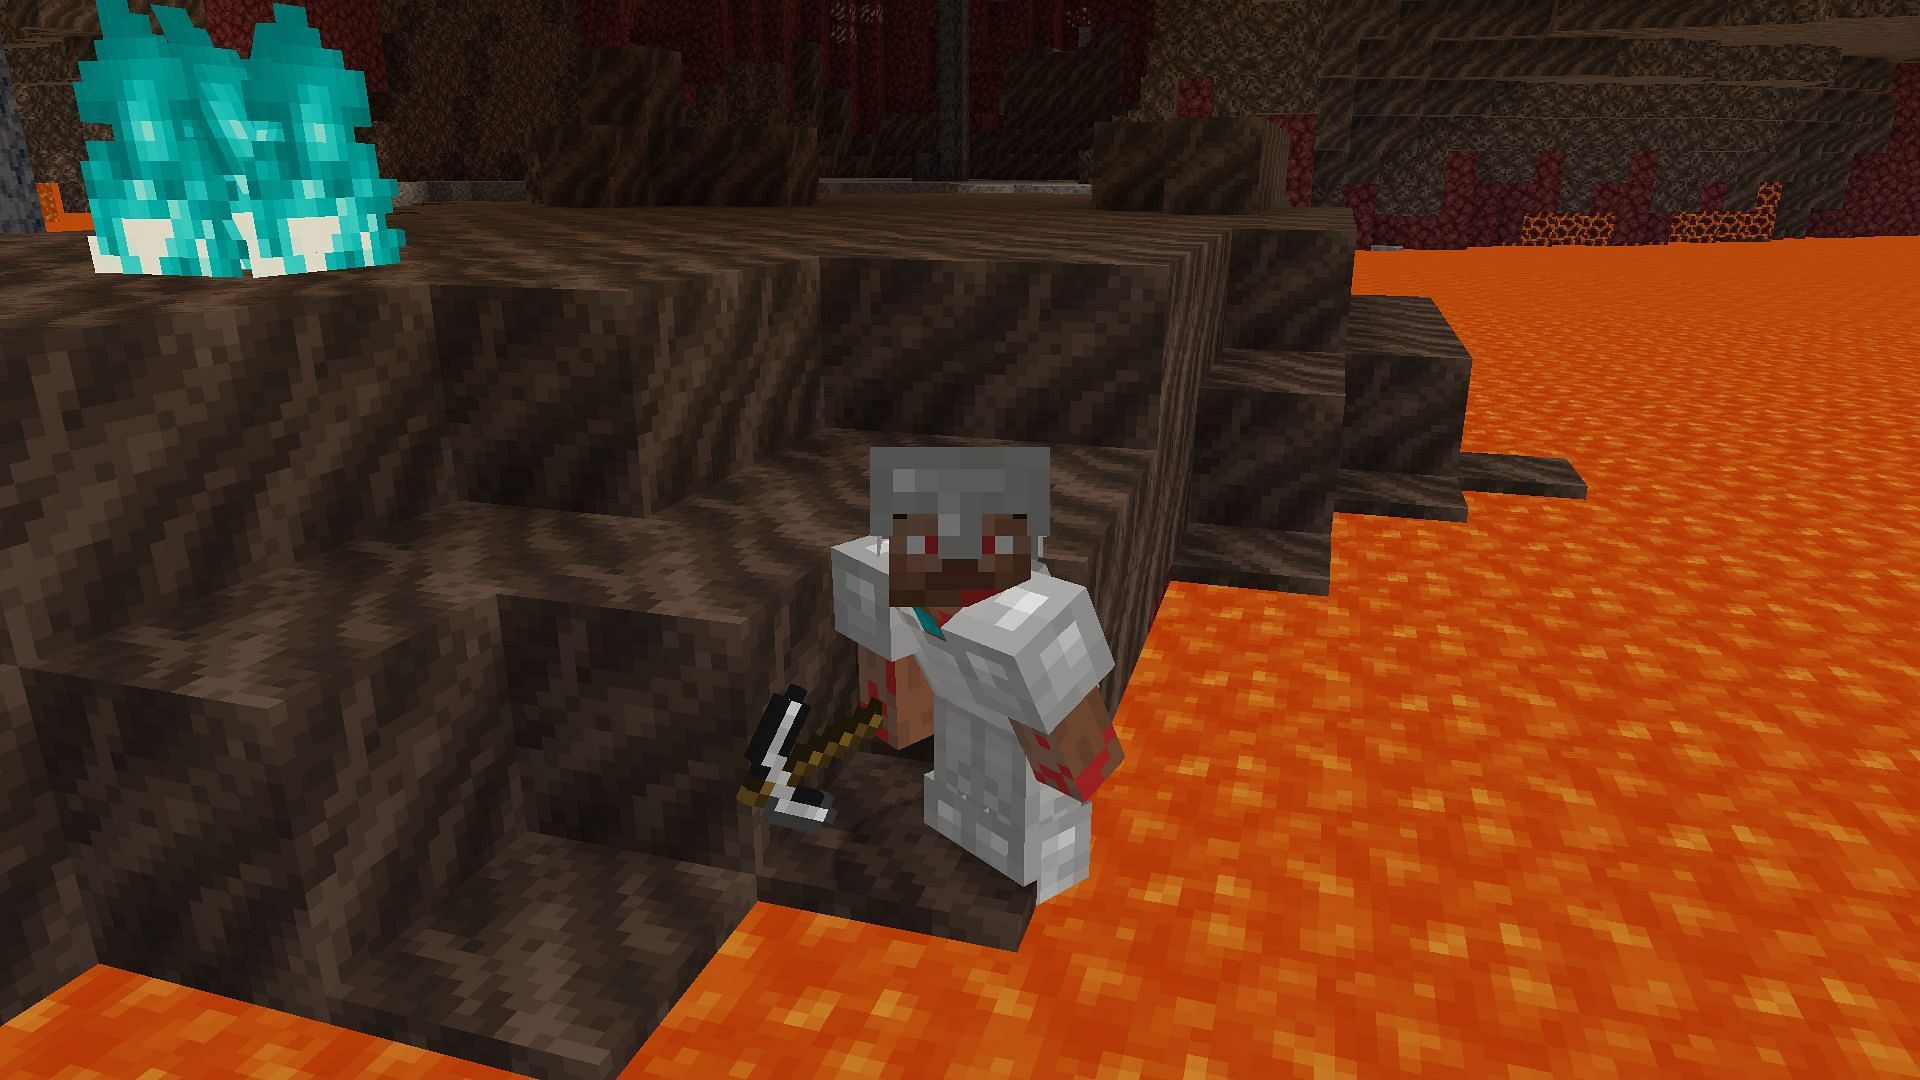 Players will get extra damage from all kinds of external factors in Minecraft (Image via Mojang)